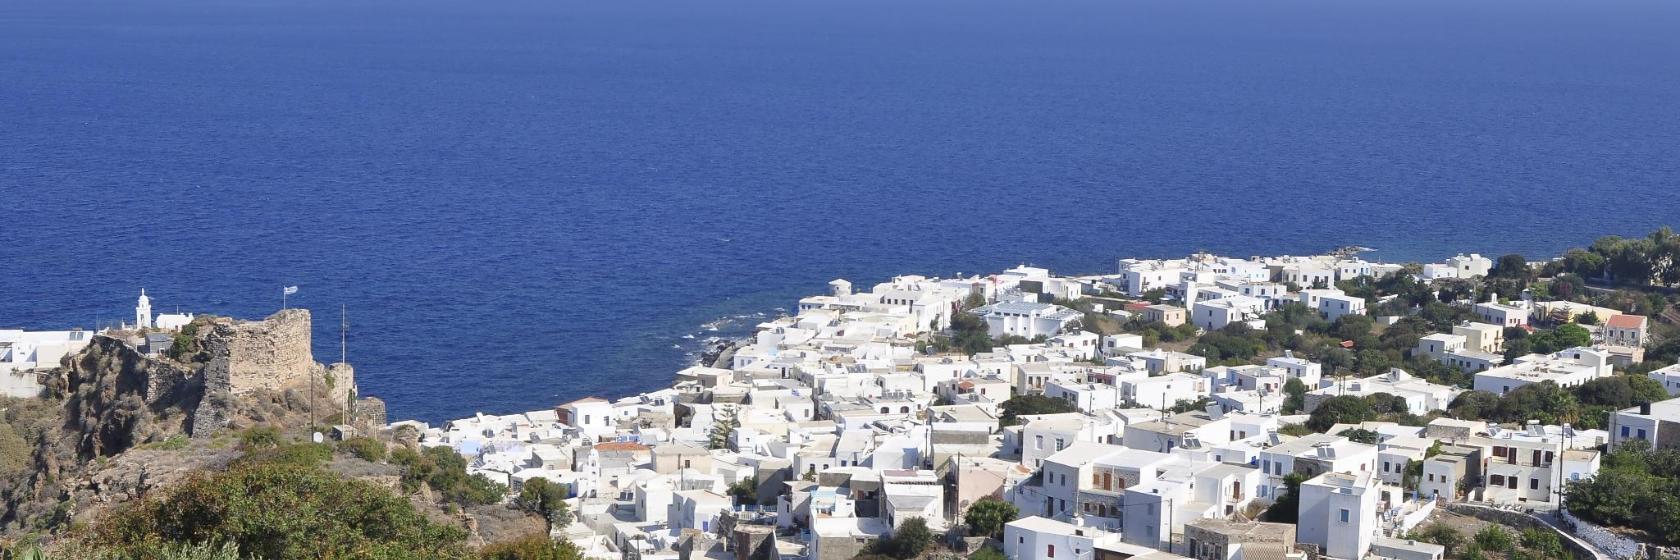 Recommended Hotels in Nisyros, Greece